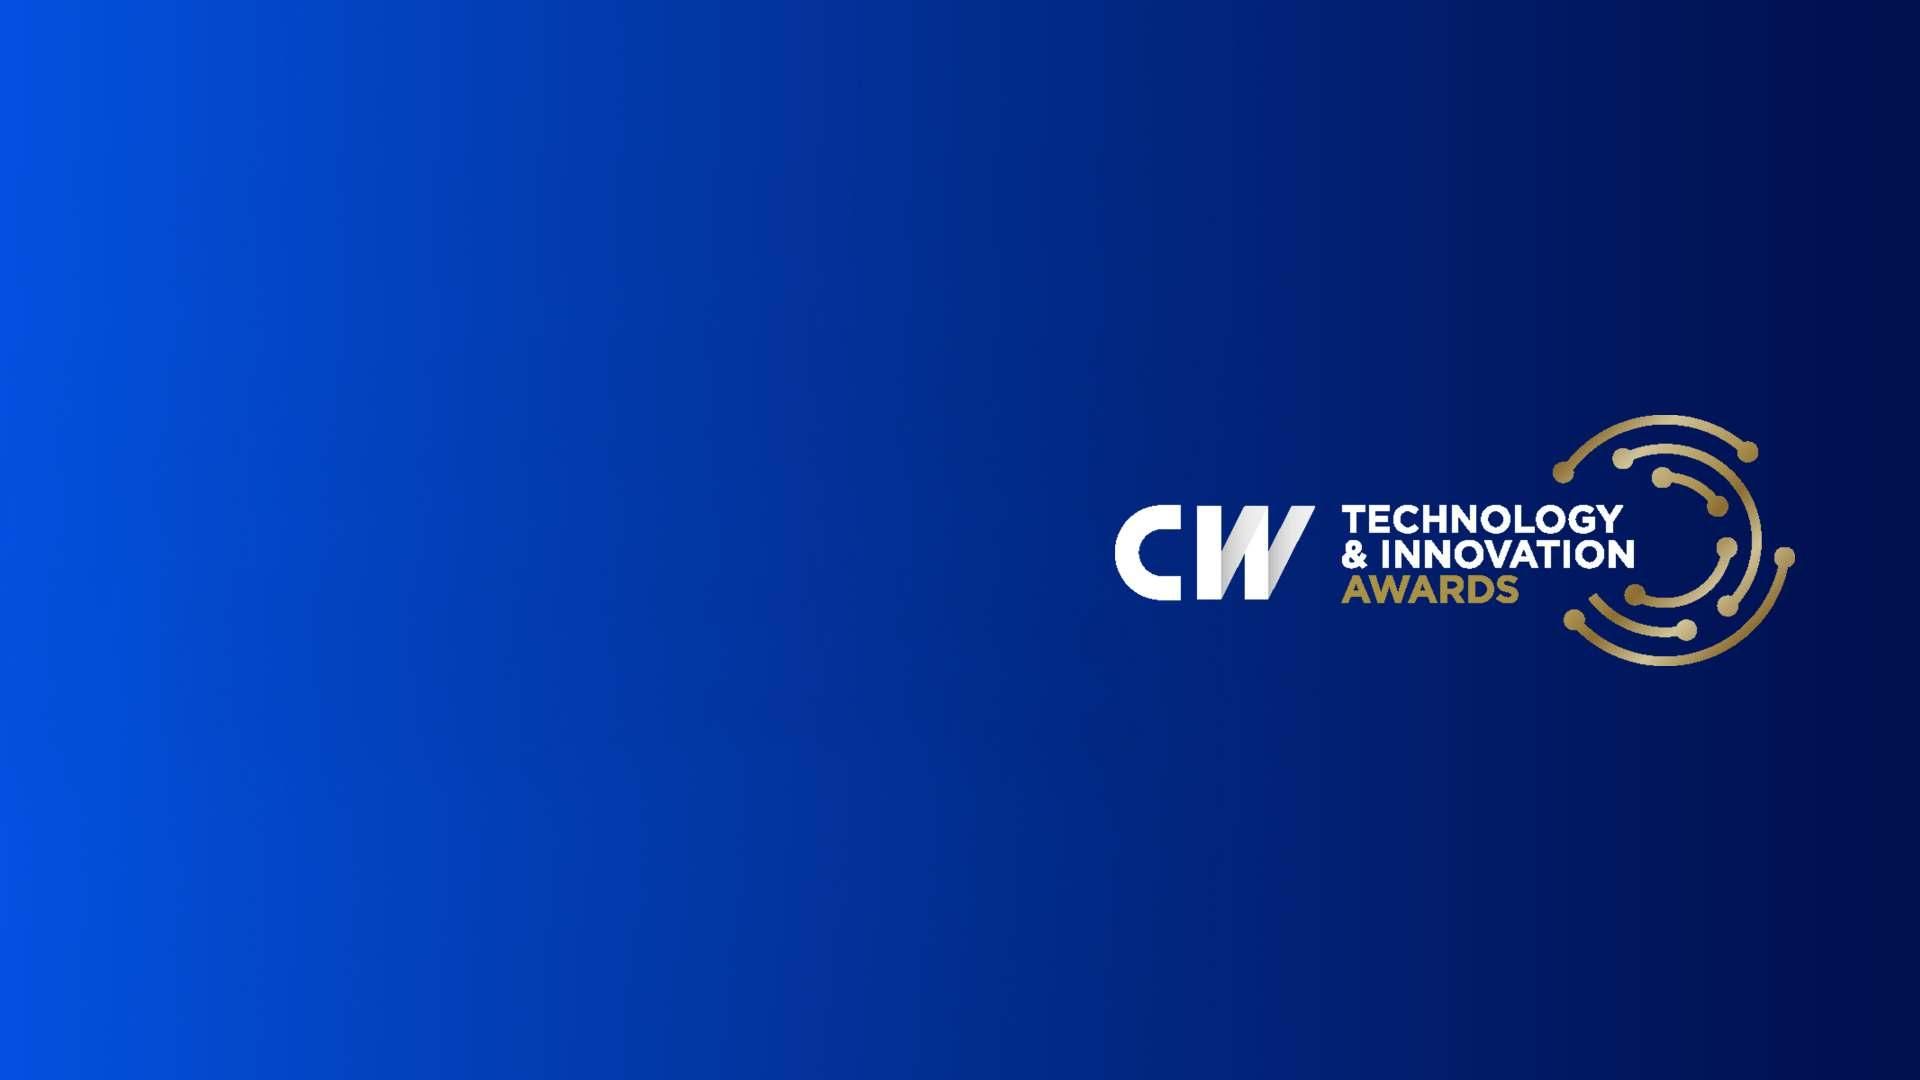 CW Technology and Innovation Awards